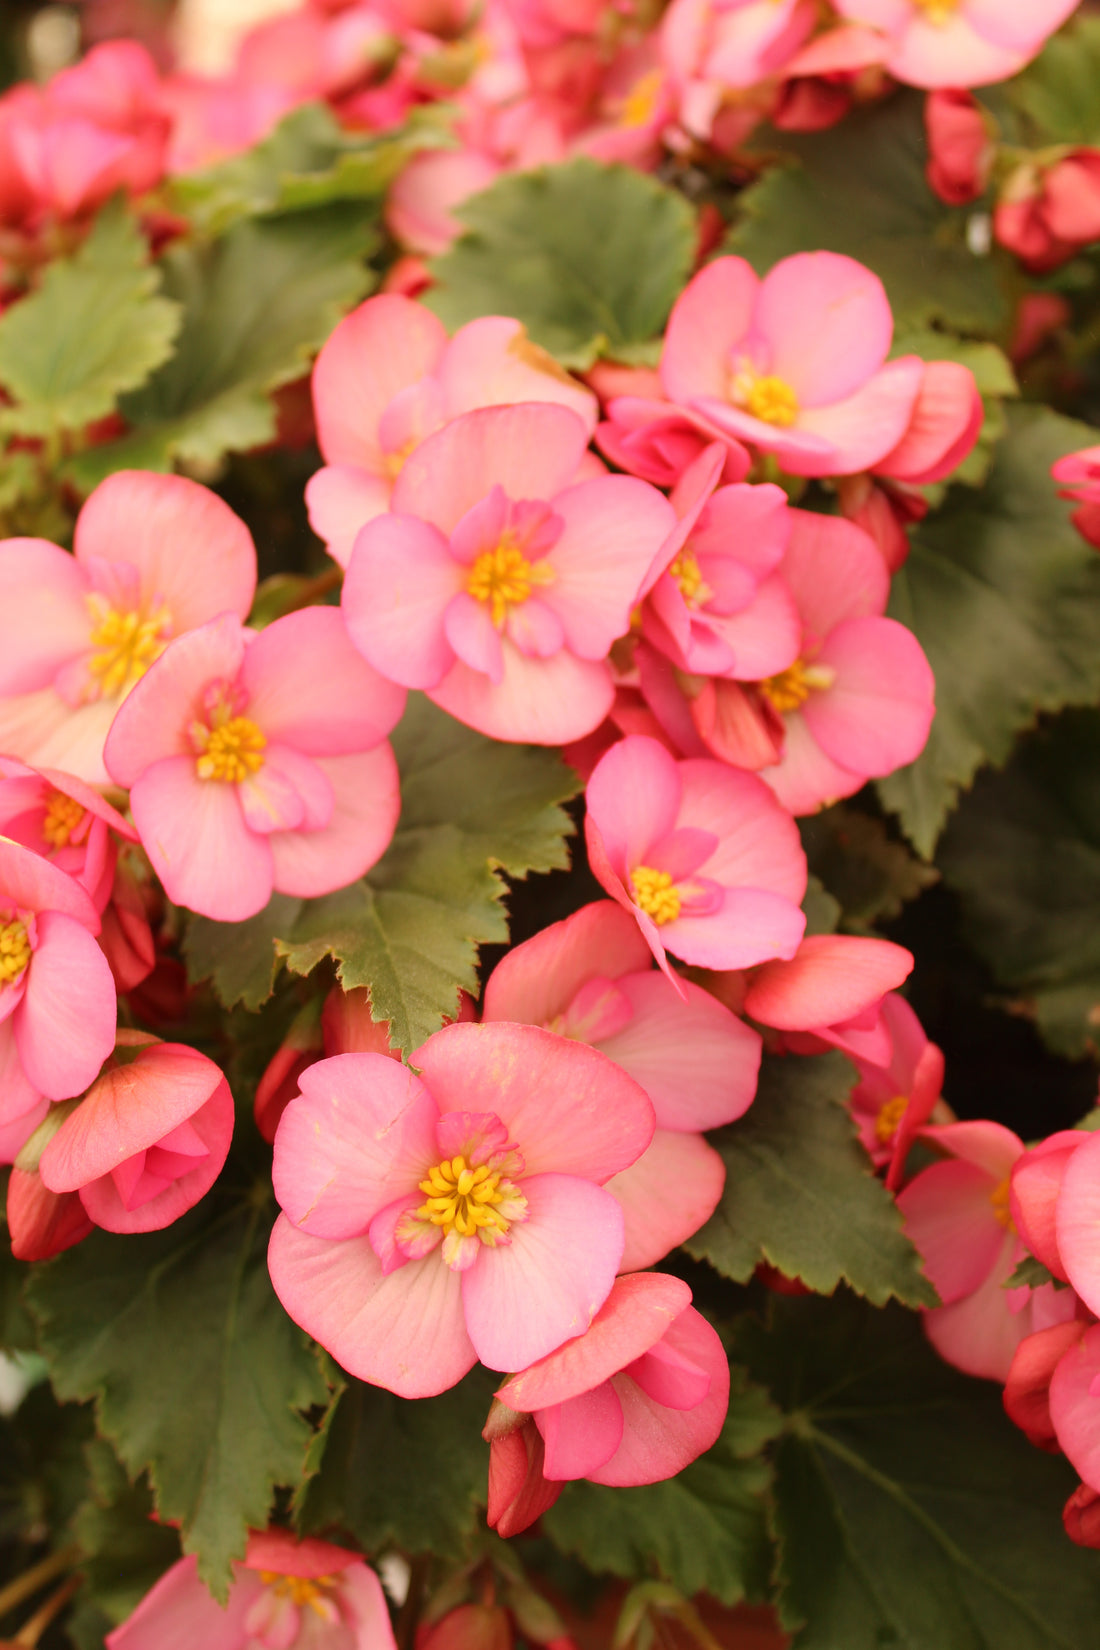 Pink cane begonia flowers with yellow centers.